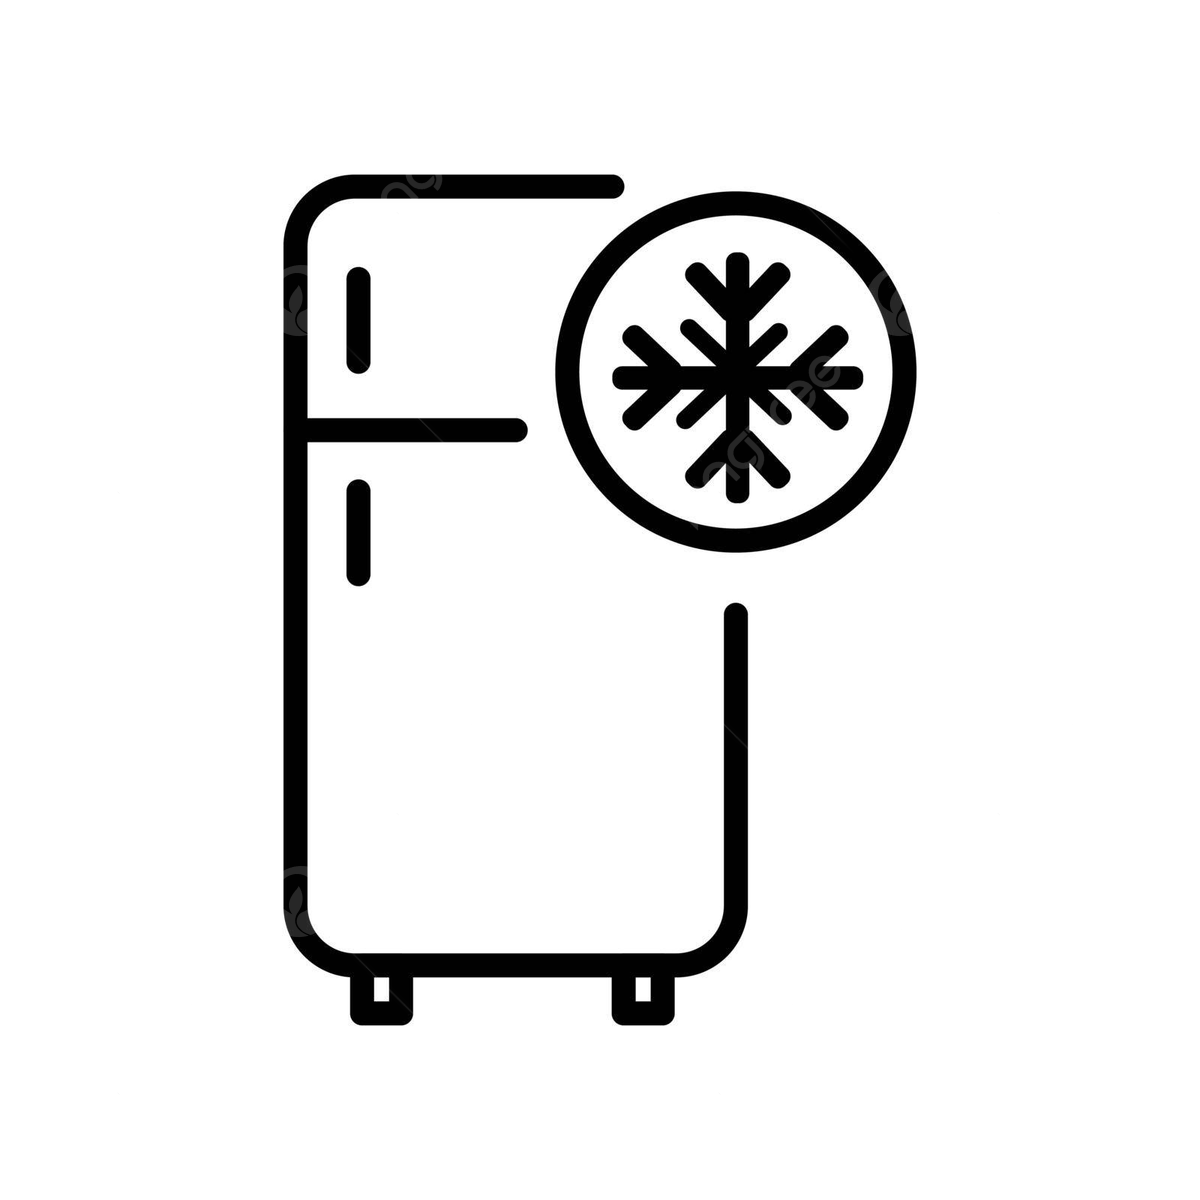 pngtree-cold-freezer-icon-with-fridge-and-snowflake-logo-vector-png-image_12599593